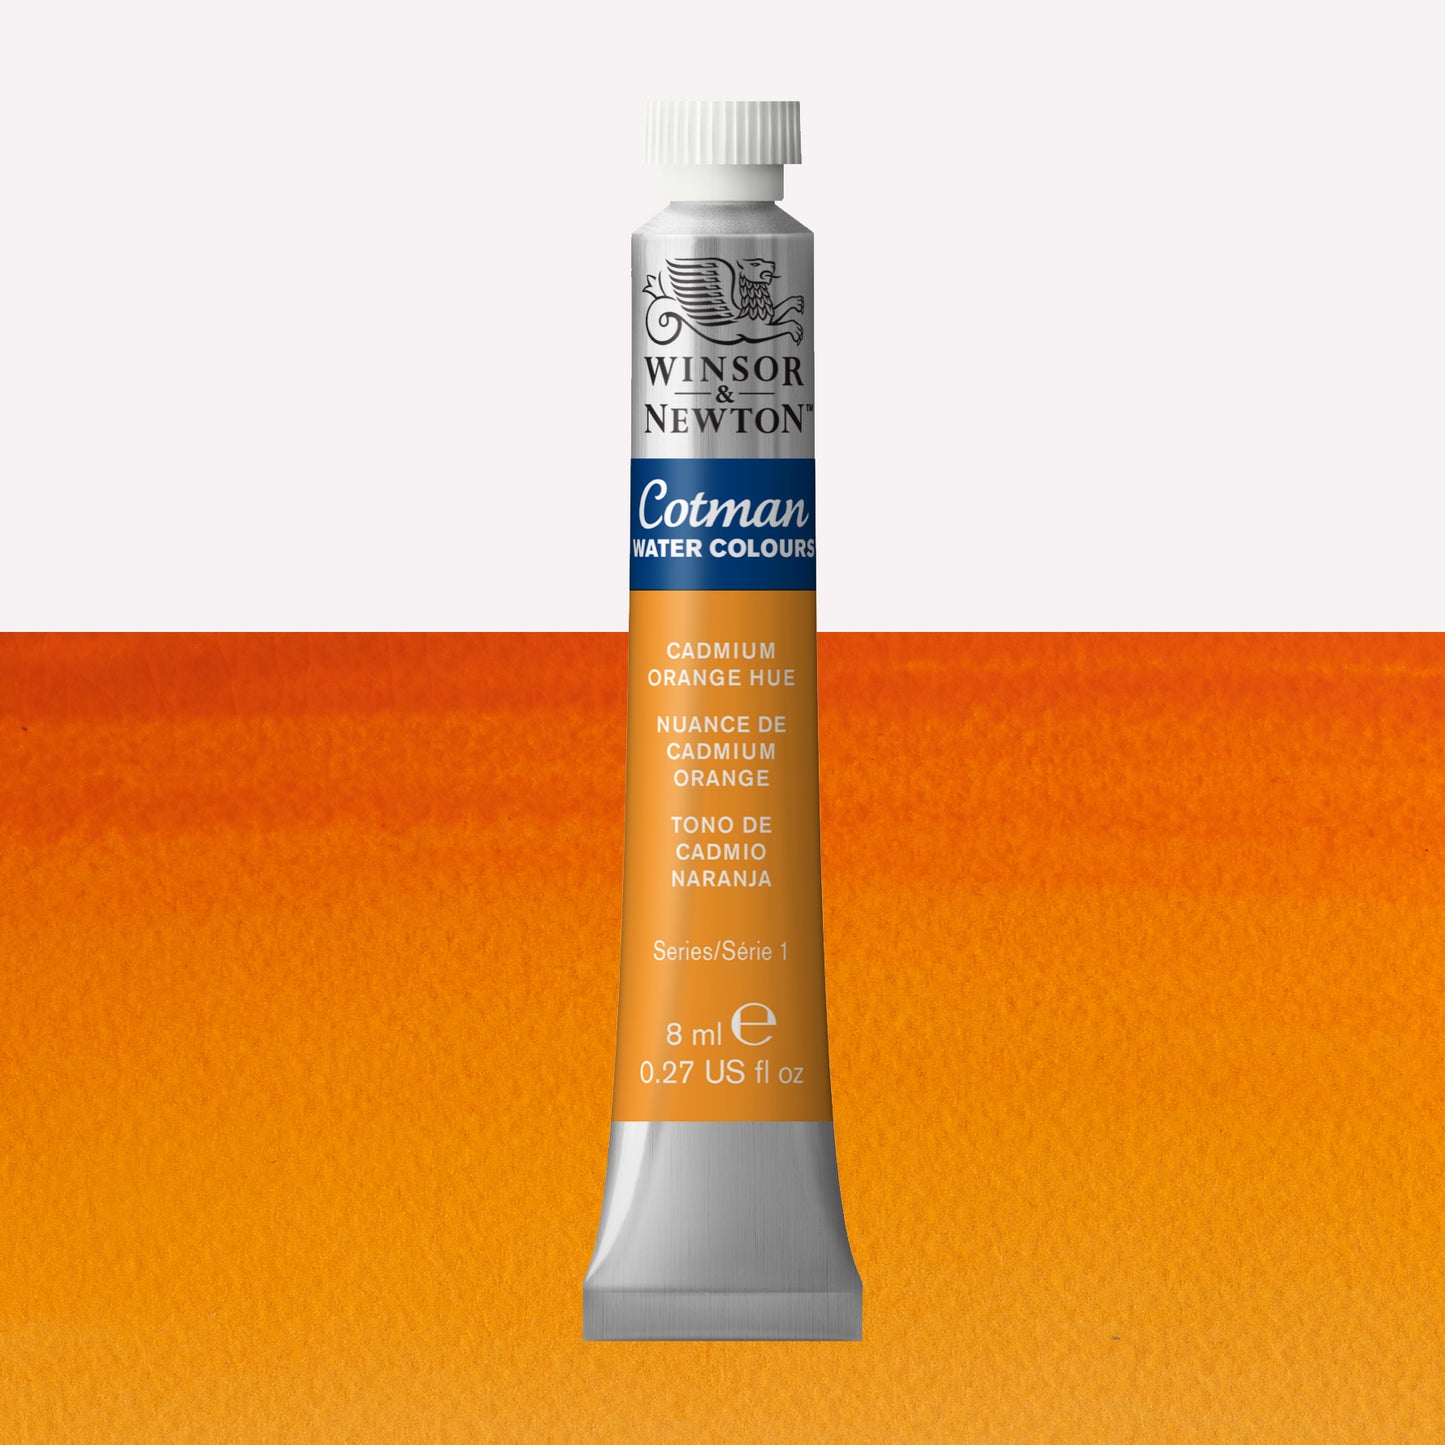 Winsor & Newton Cotman watercolour paint packaged in 8ml silver tubes with a white lid in the shade Cadmium Orange Hue Pale over a highly pigmented colour swatch.